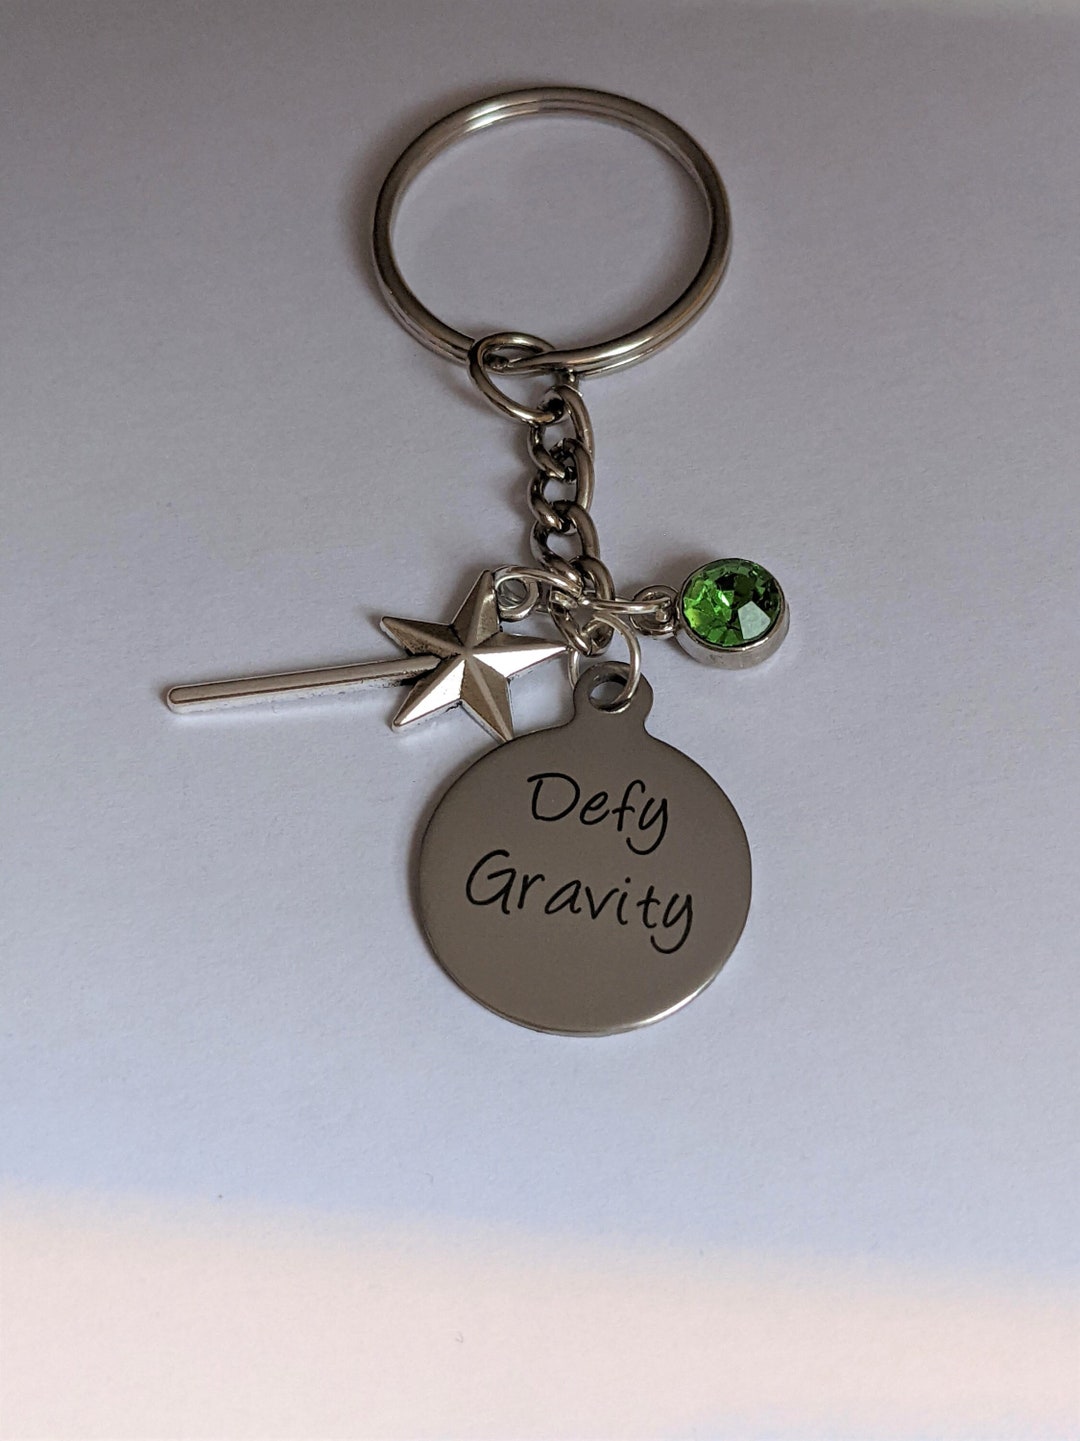 Wicked The Musical Defy Gravity Necklace, Muscal Keyring, Wicked Keychain, Personalised, Wicked Musical Lyrics, Elpheba, Wizard of Oz, Gift